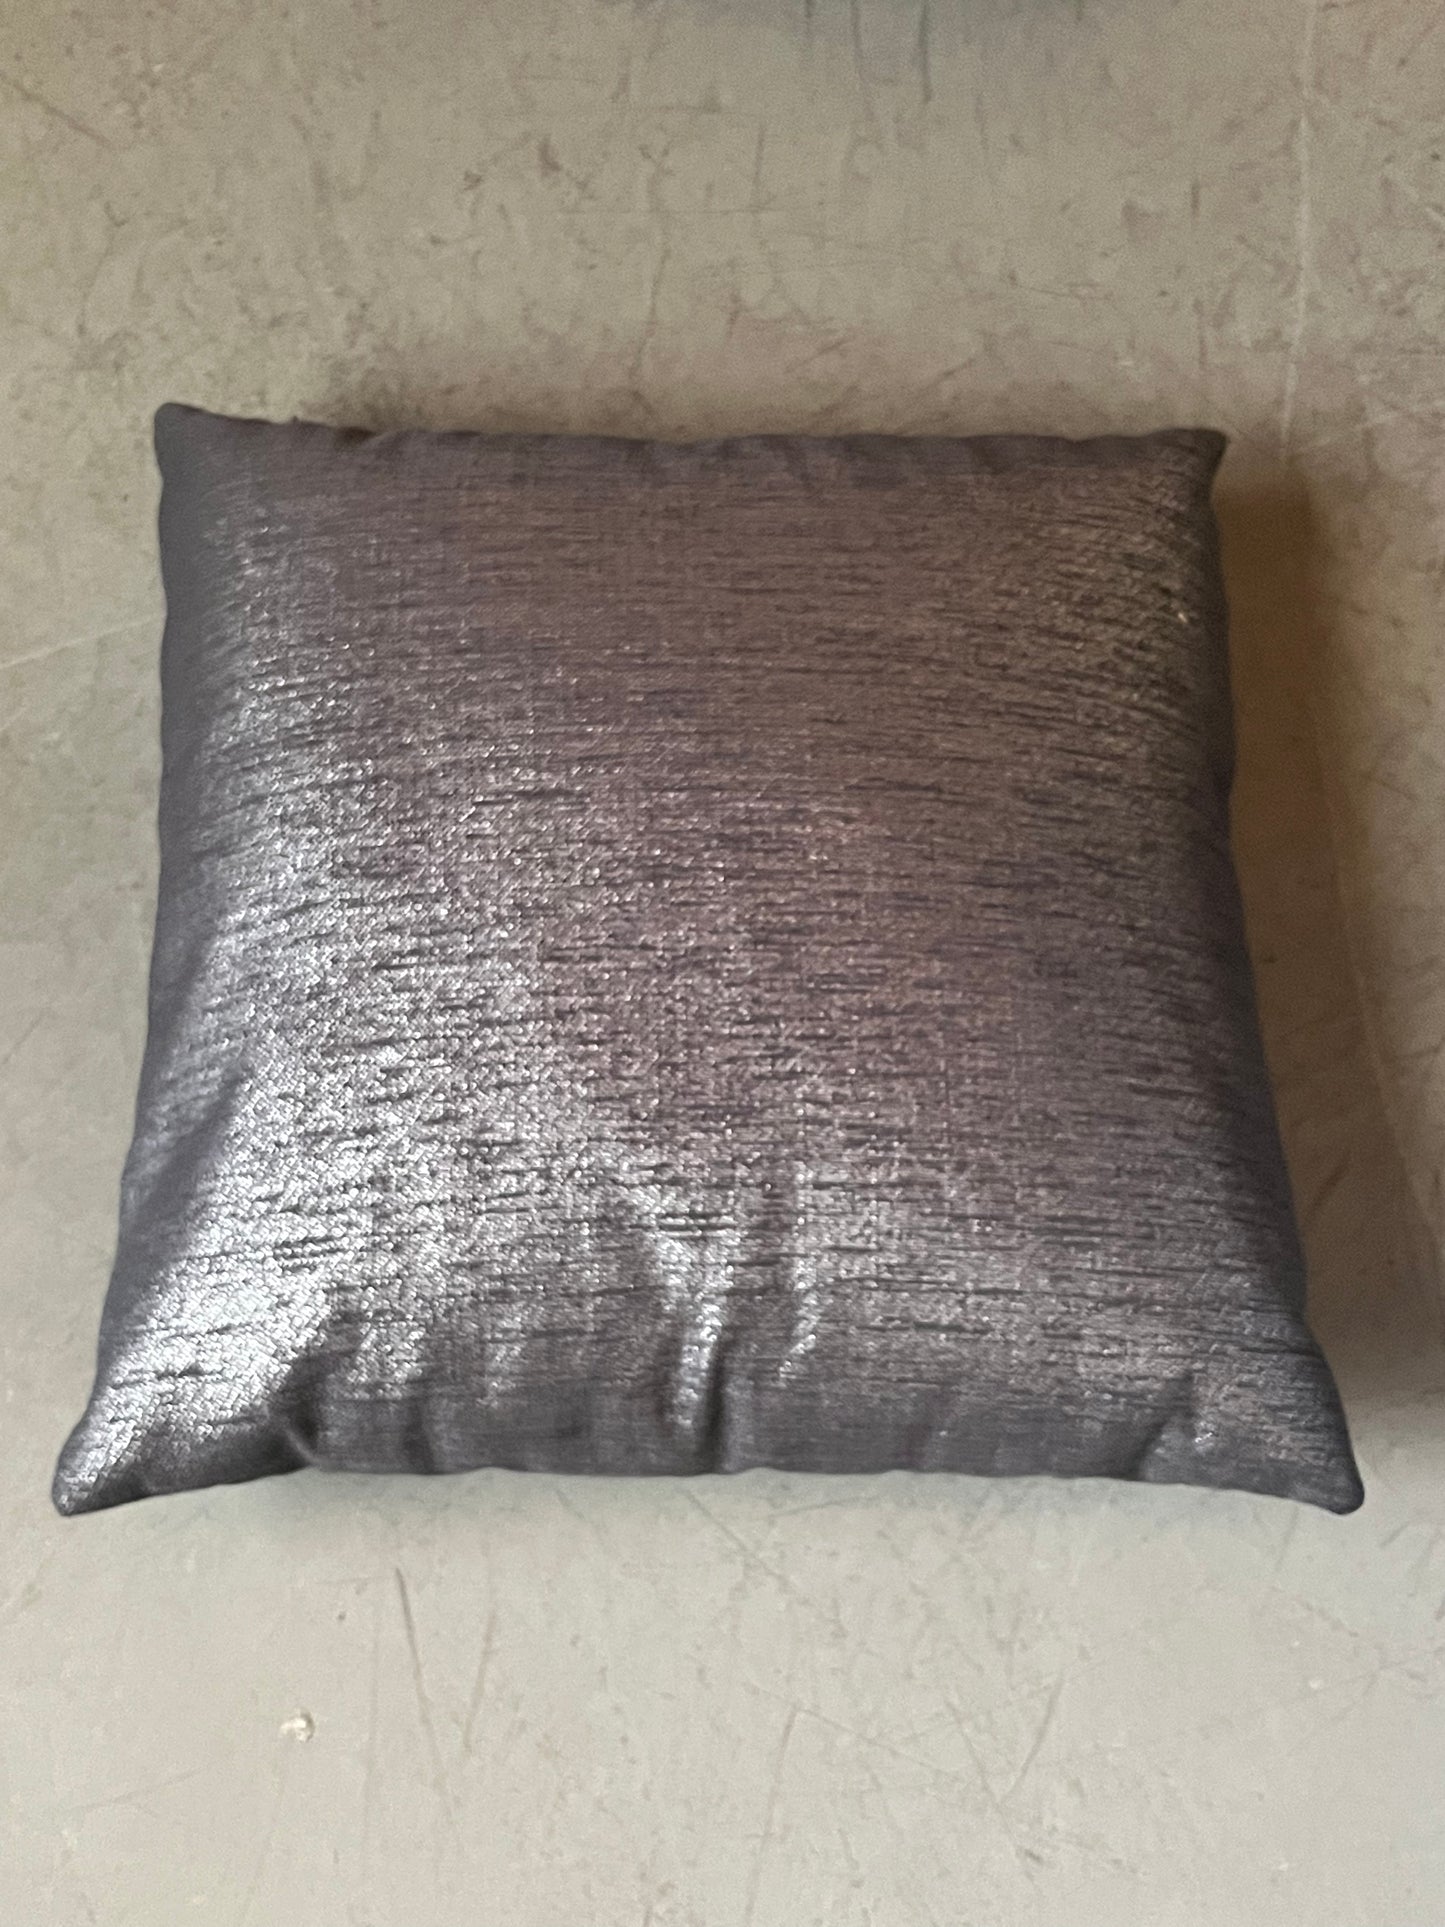 JUSTIFIED: Raylan's Silver Throw Pillow